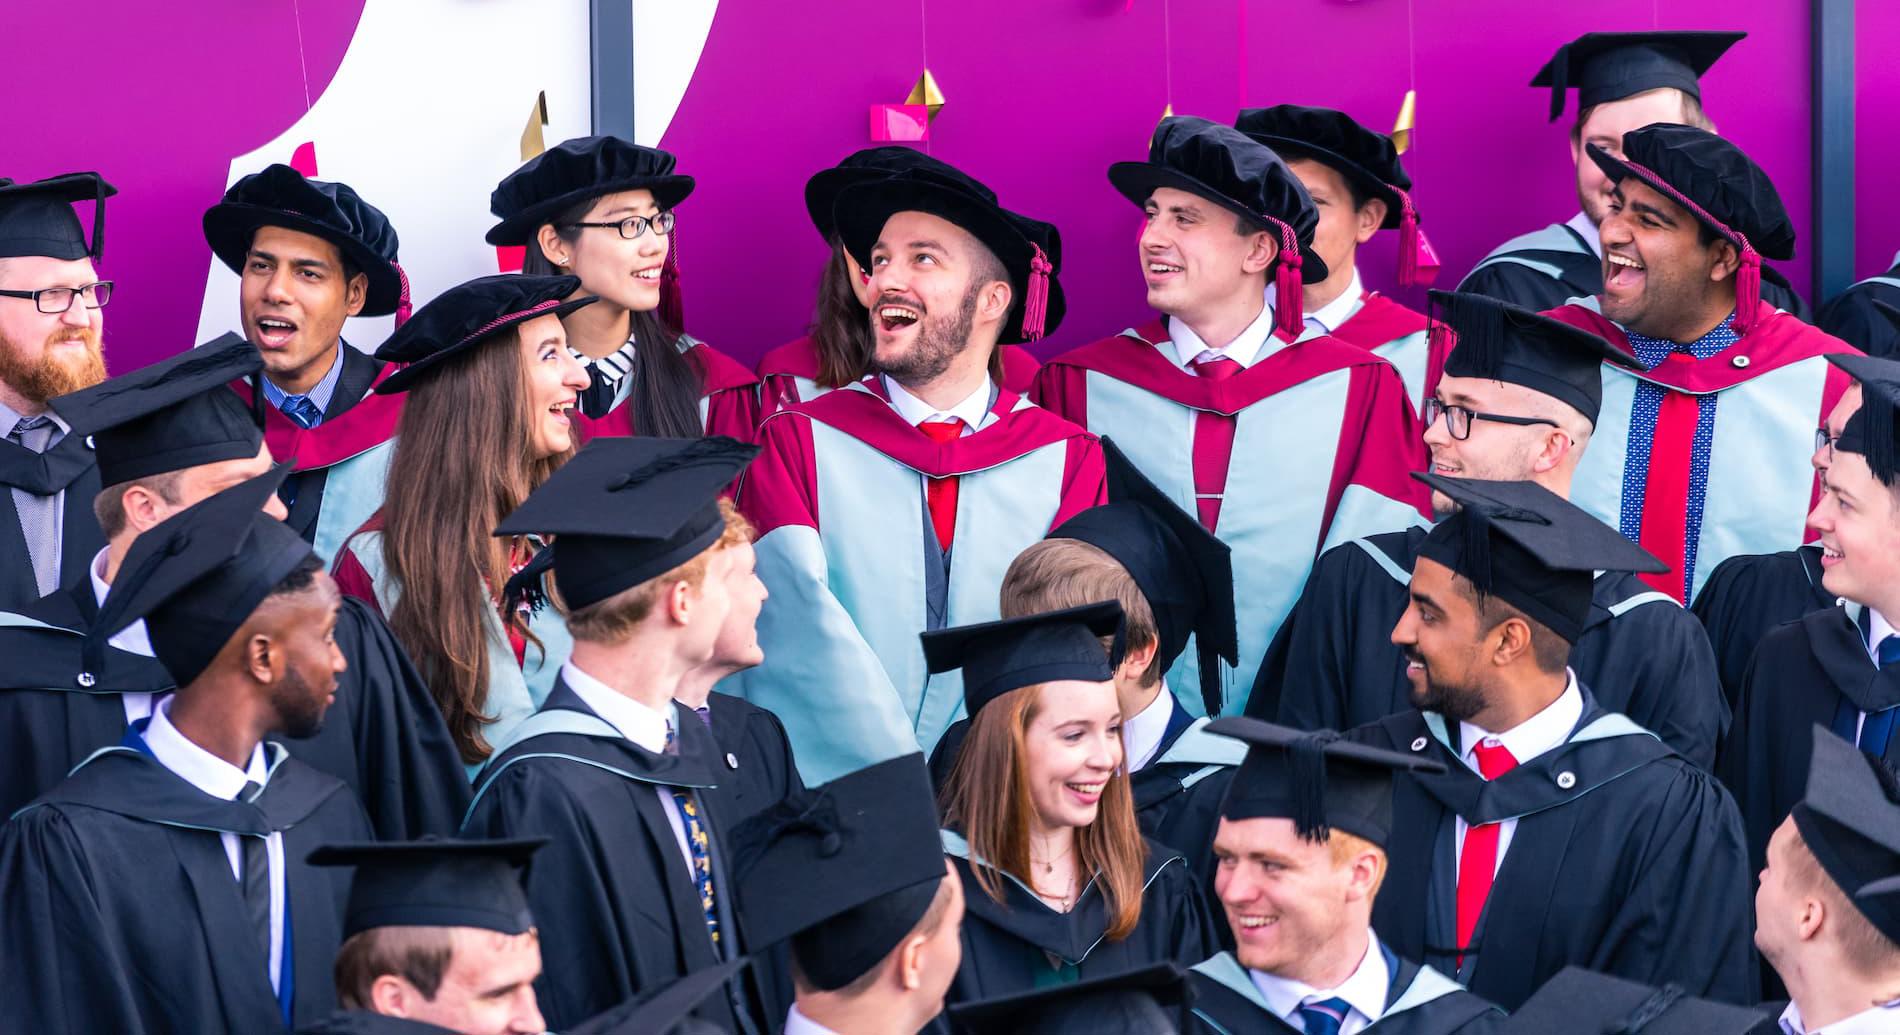 2023 University of Hull Honorary Graduates have been named ahead of